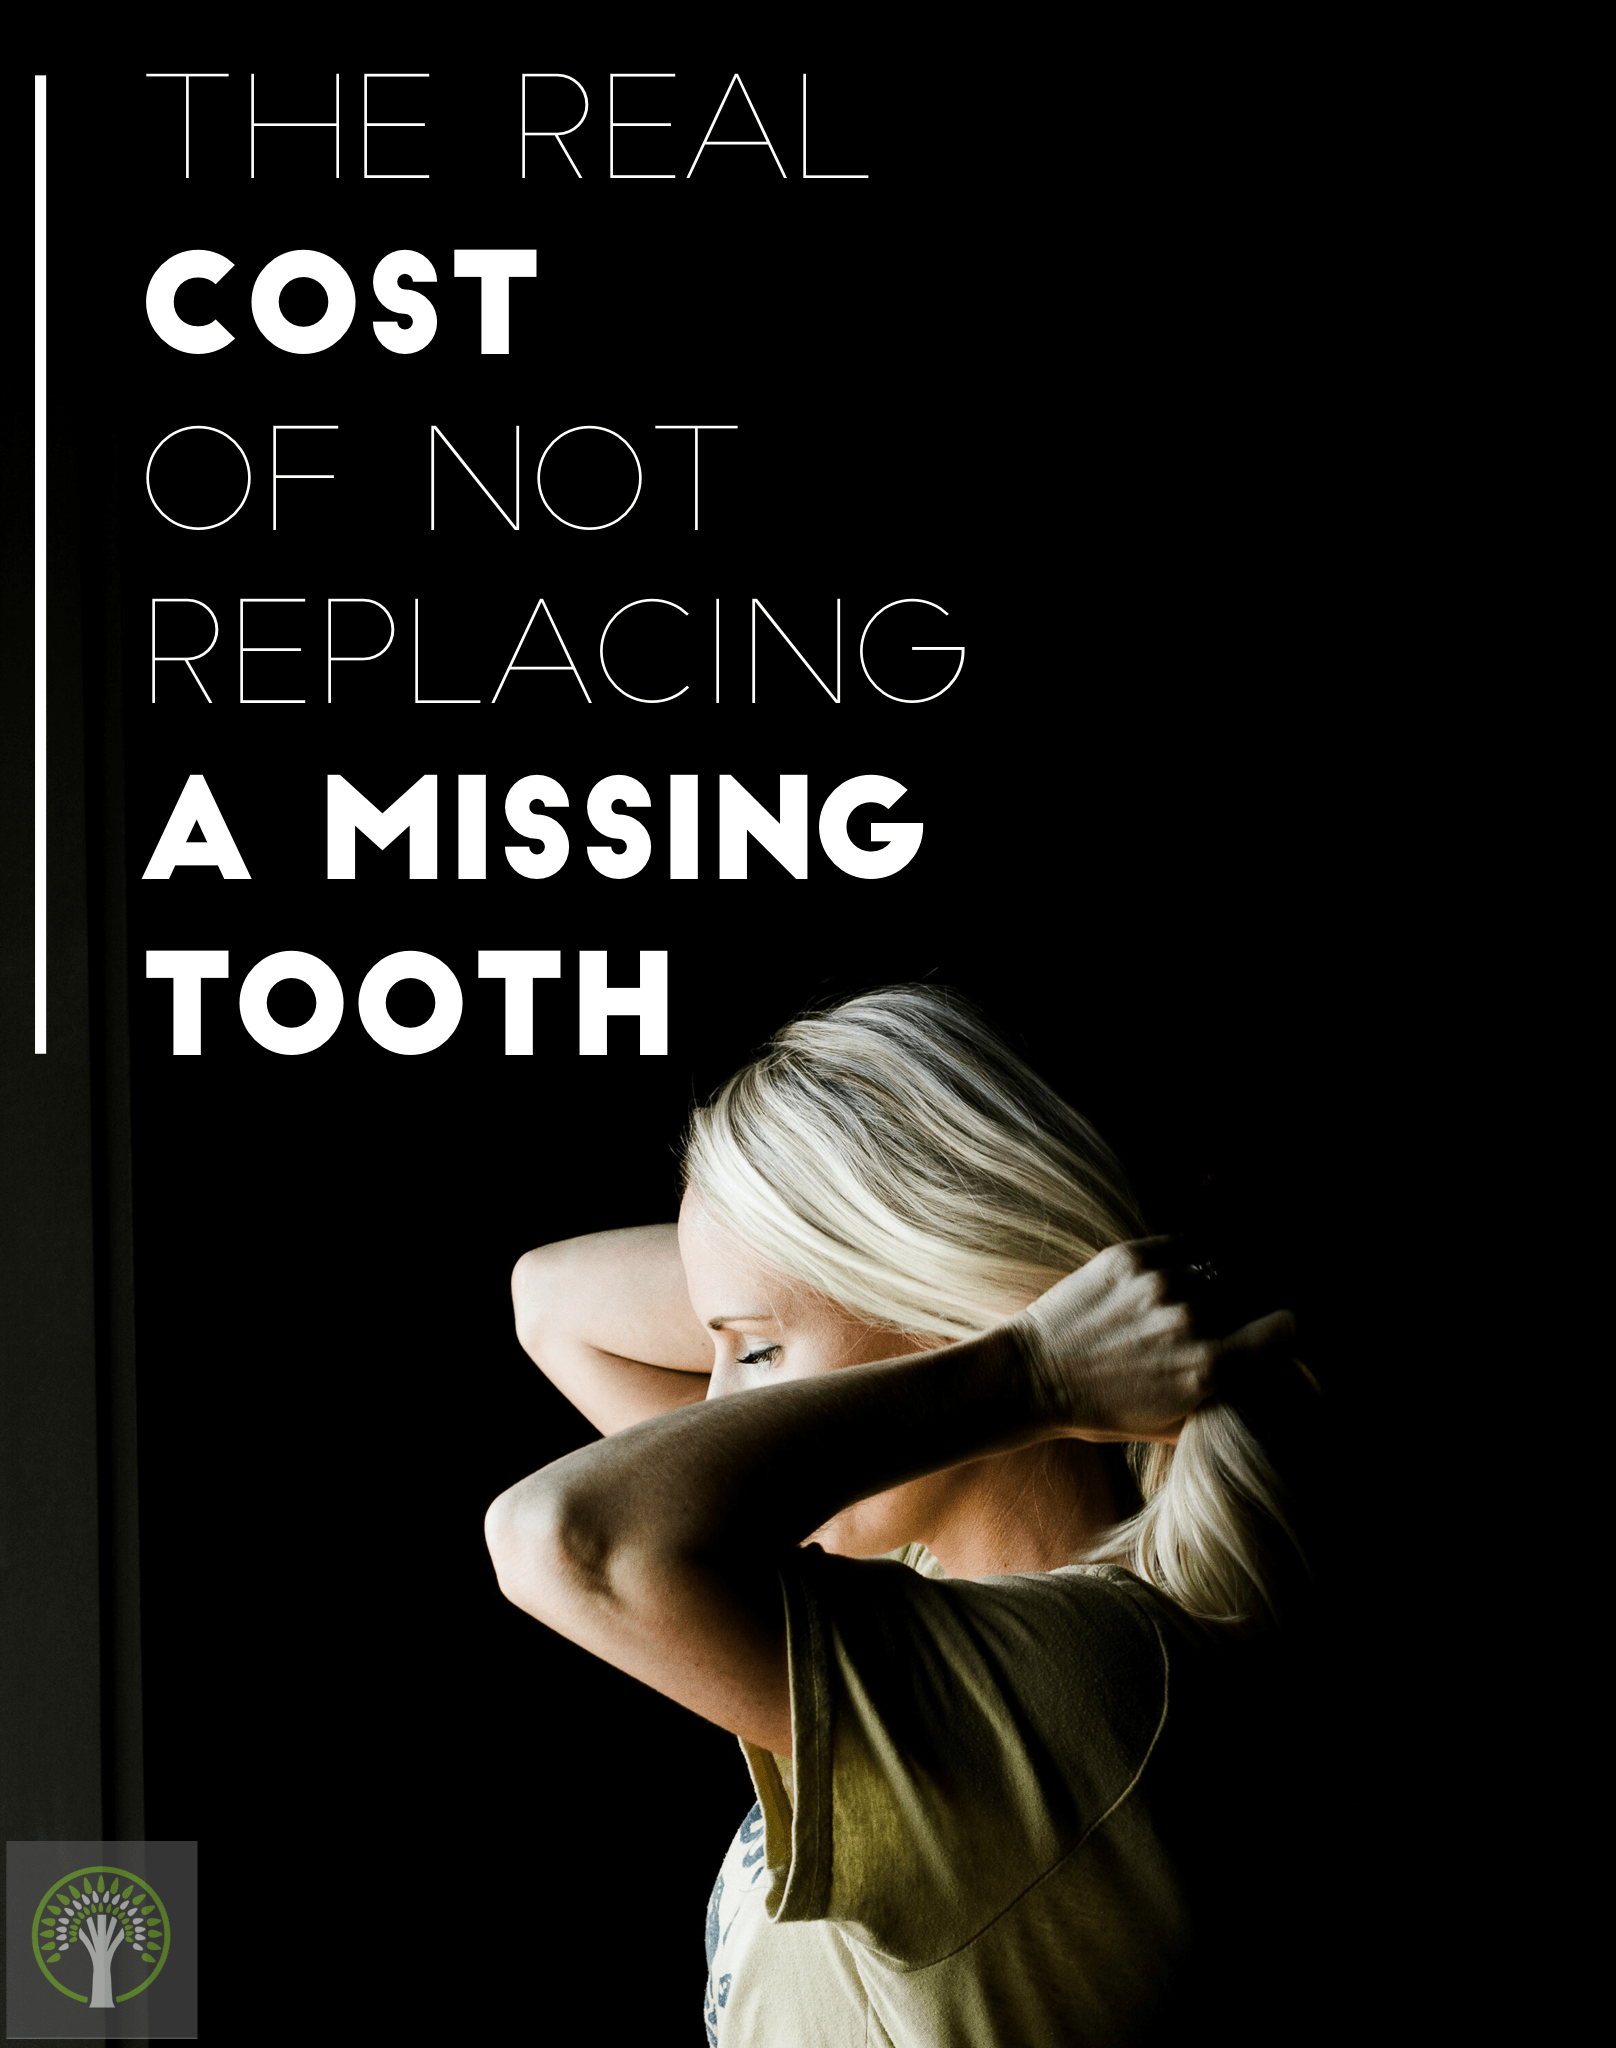 The Real Cost of NOT Replacing a Missing Tooth